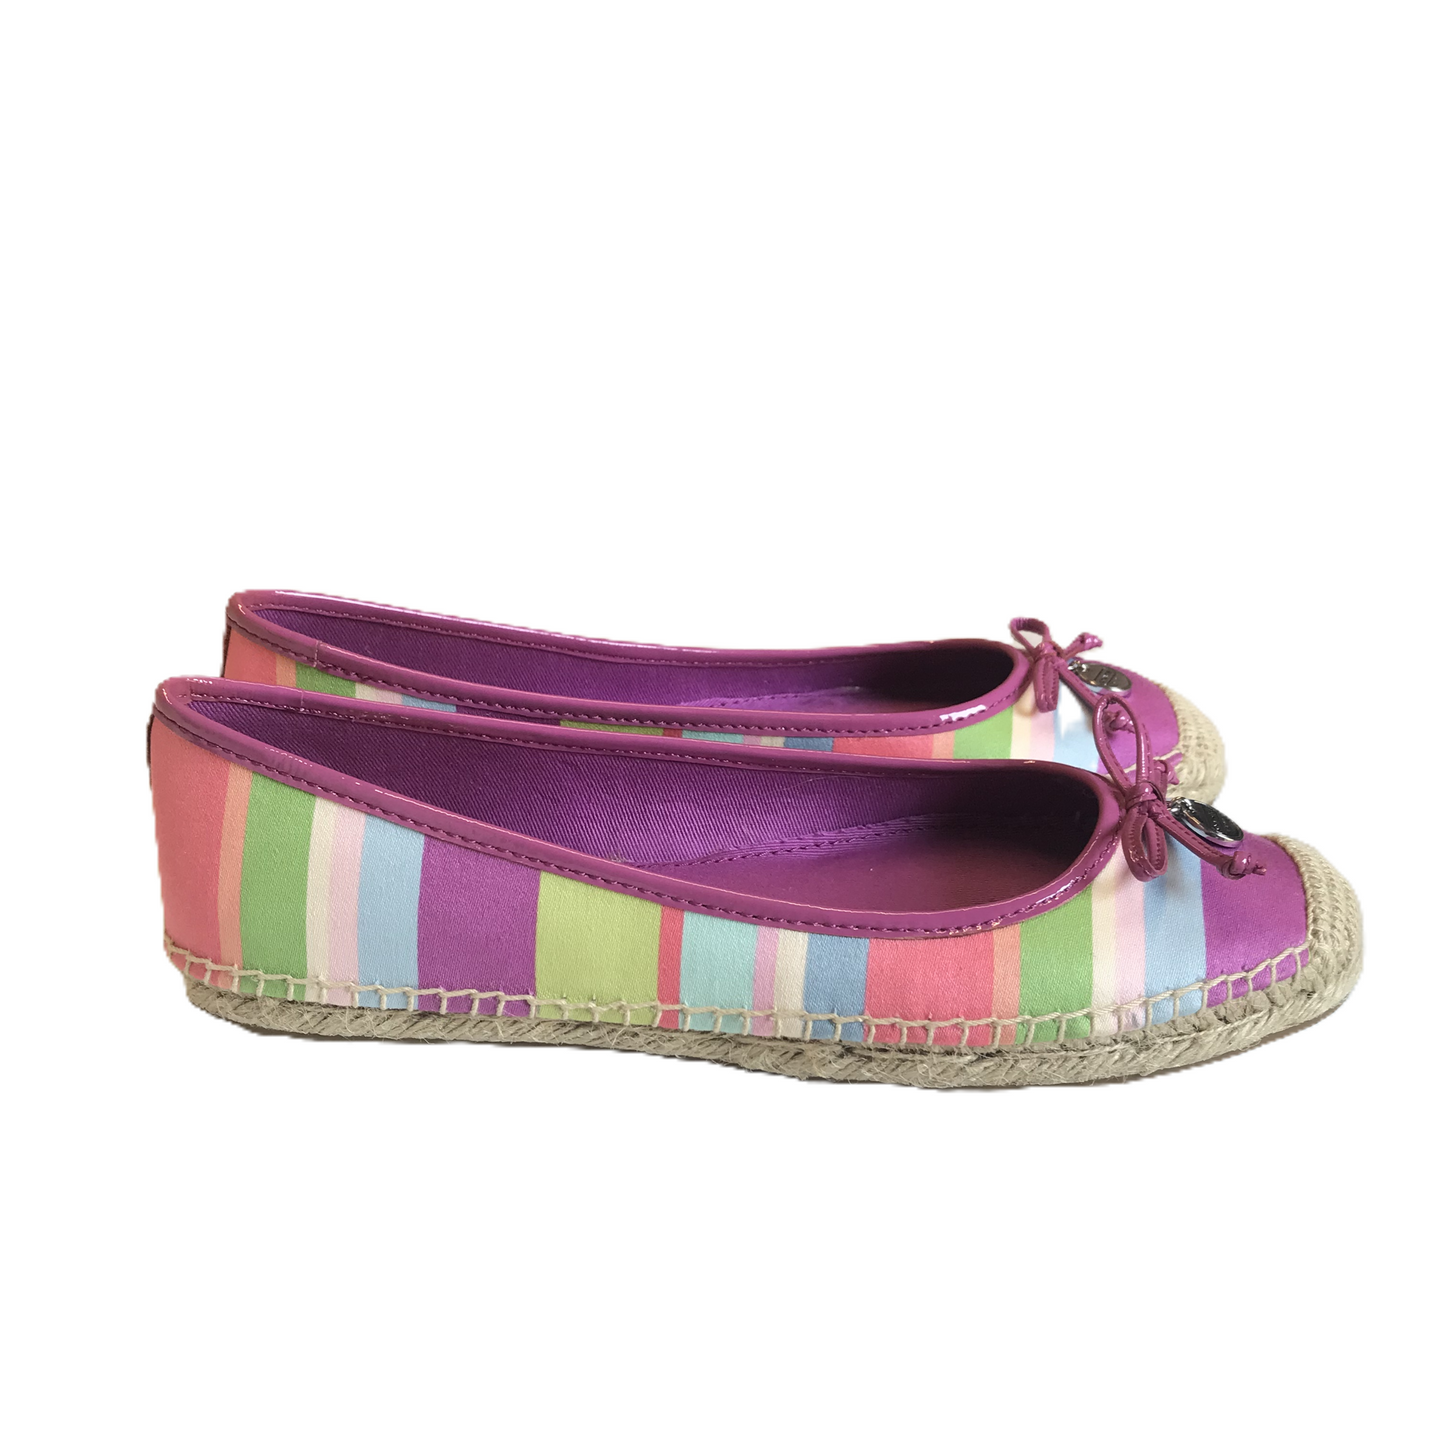 Multi-colored Shoes Flats By Coach, Size: 7.5